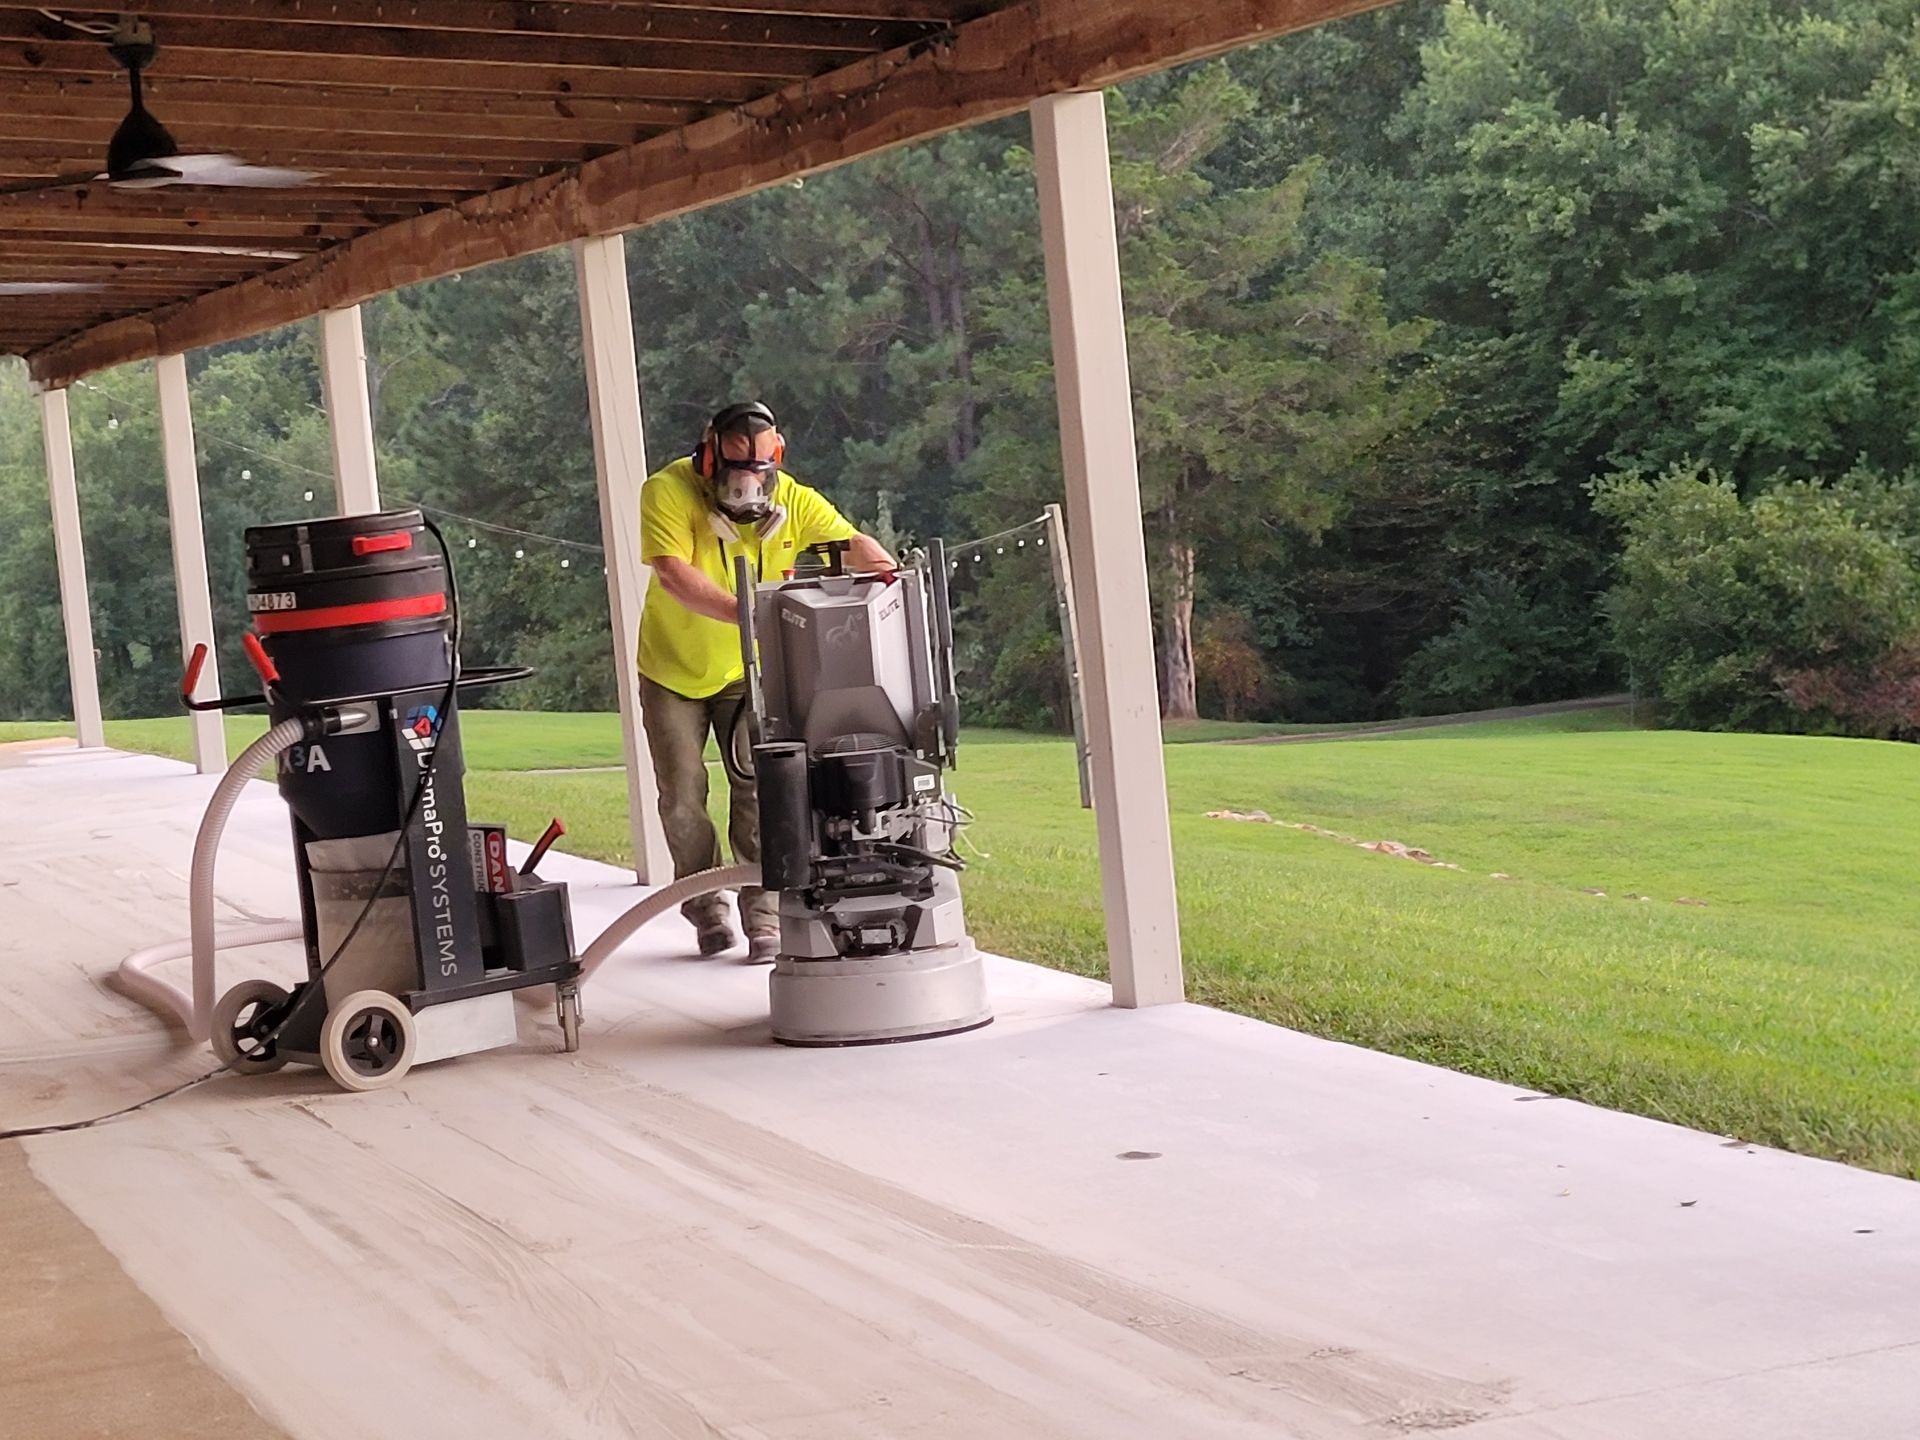 A man is using a machine to grind concrete on a porch.